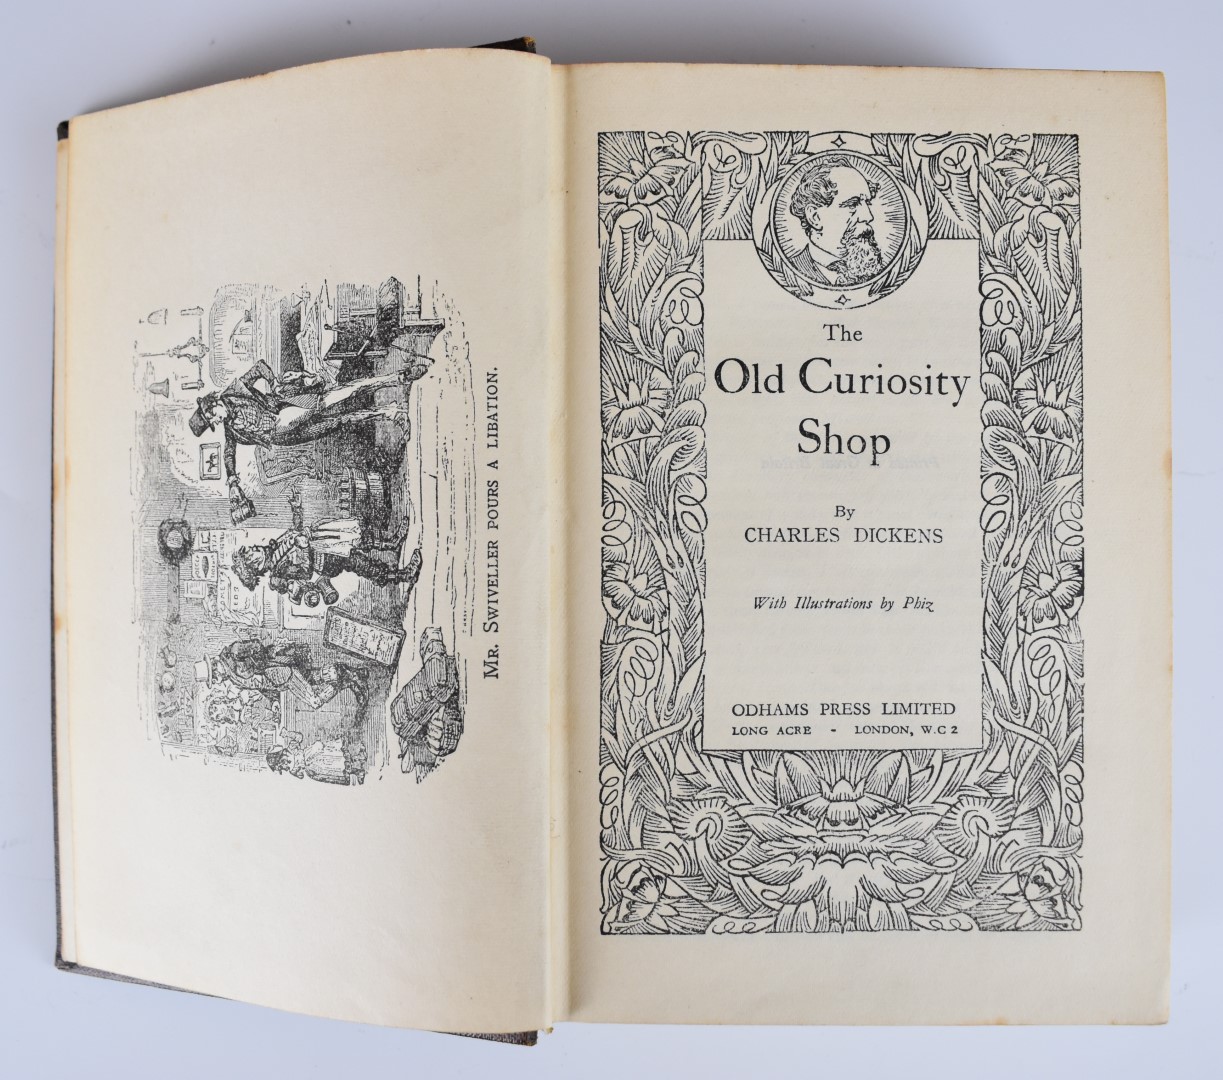 Charles Dickens collection of 22 Illustrated Novels and Life & Character published Odhams Press (c. - Image 2 of 4